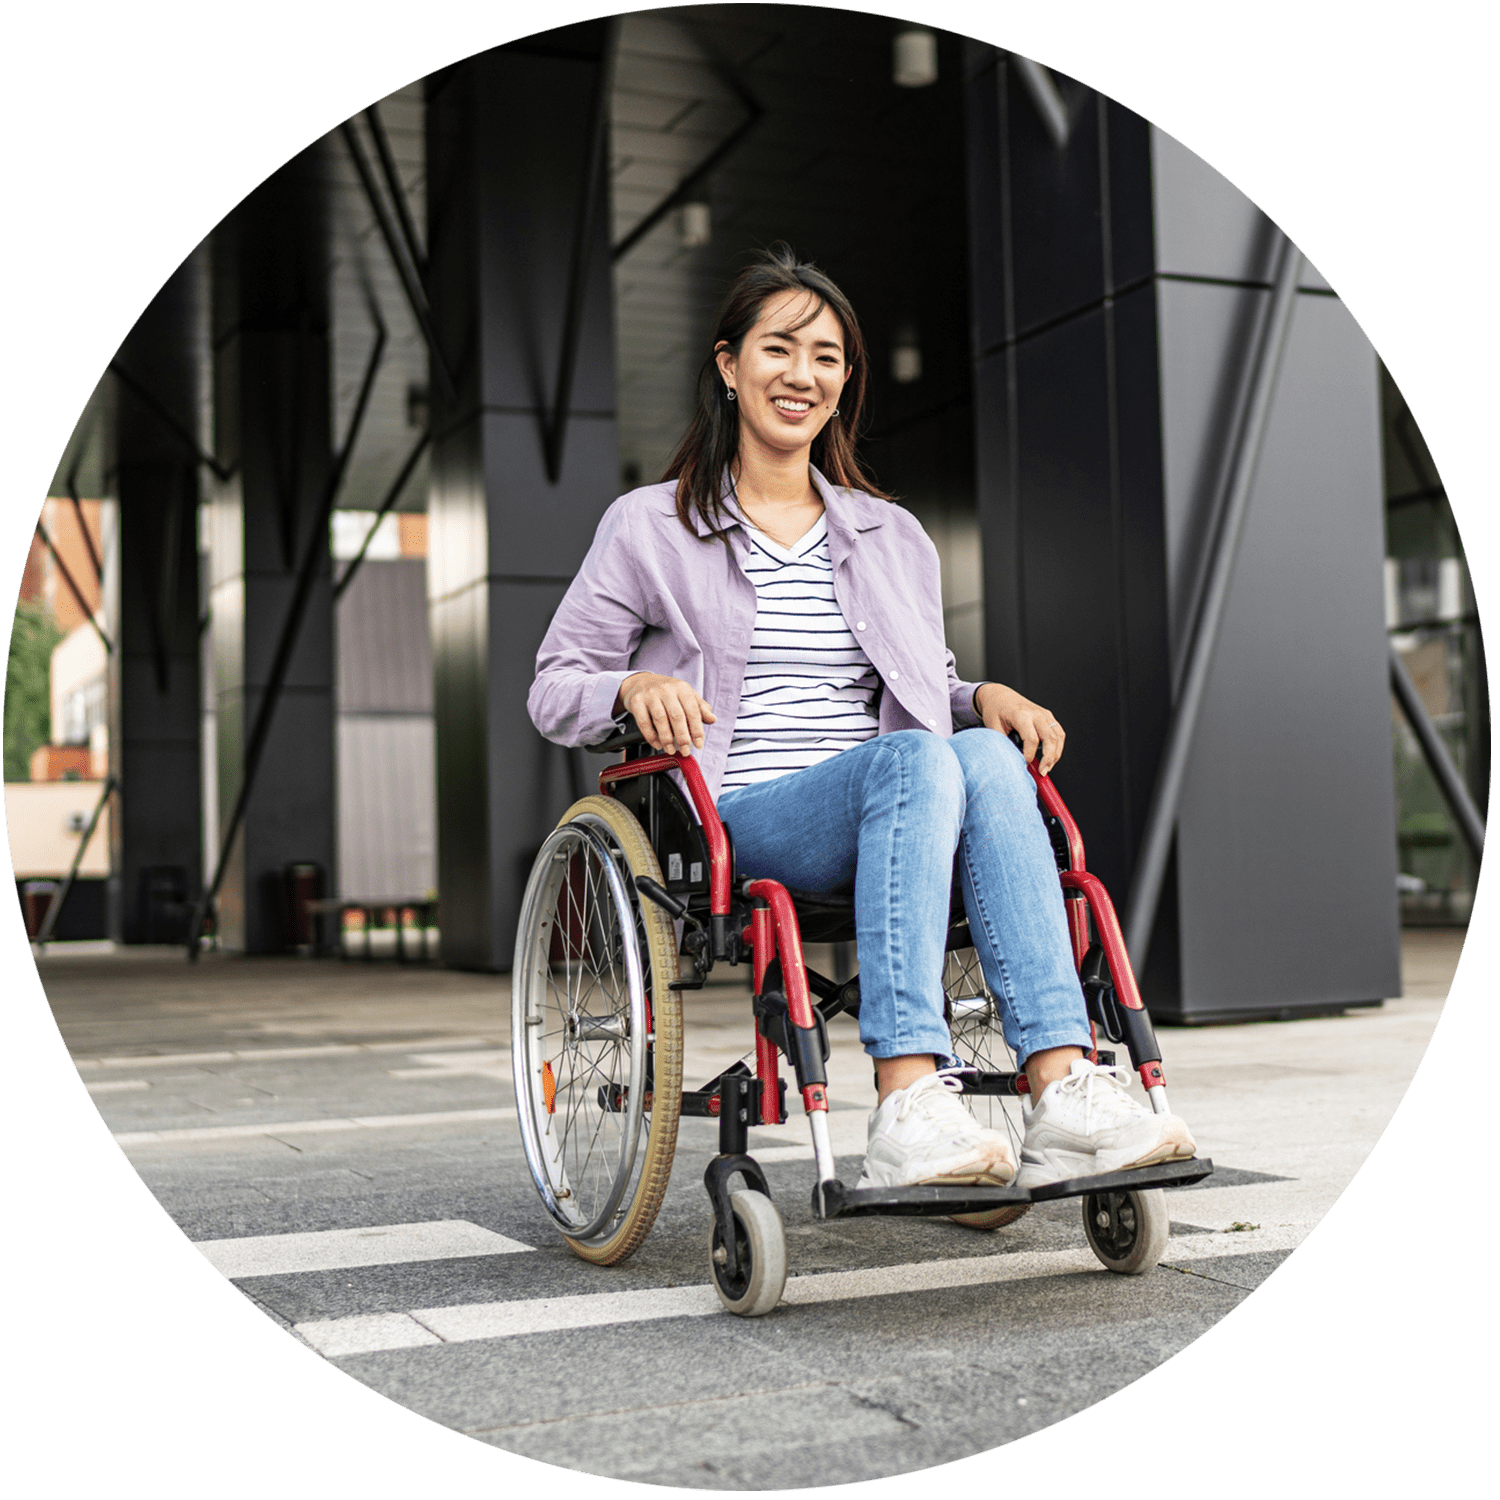 A smiling student in a wheelchair outside of a building.